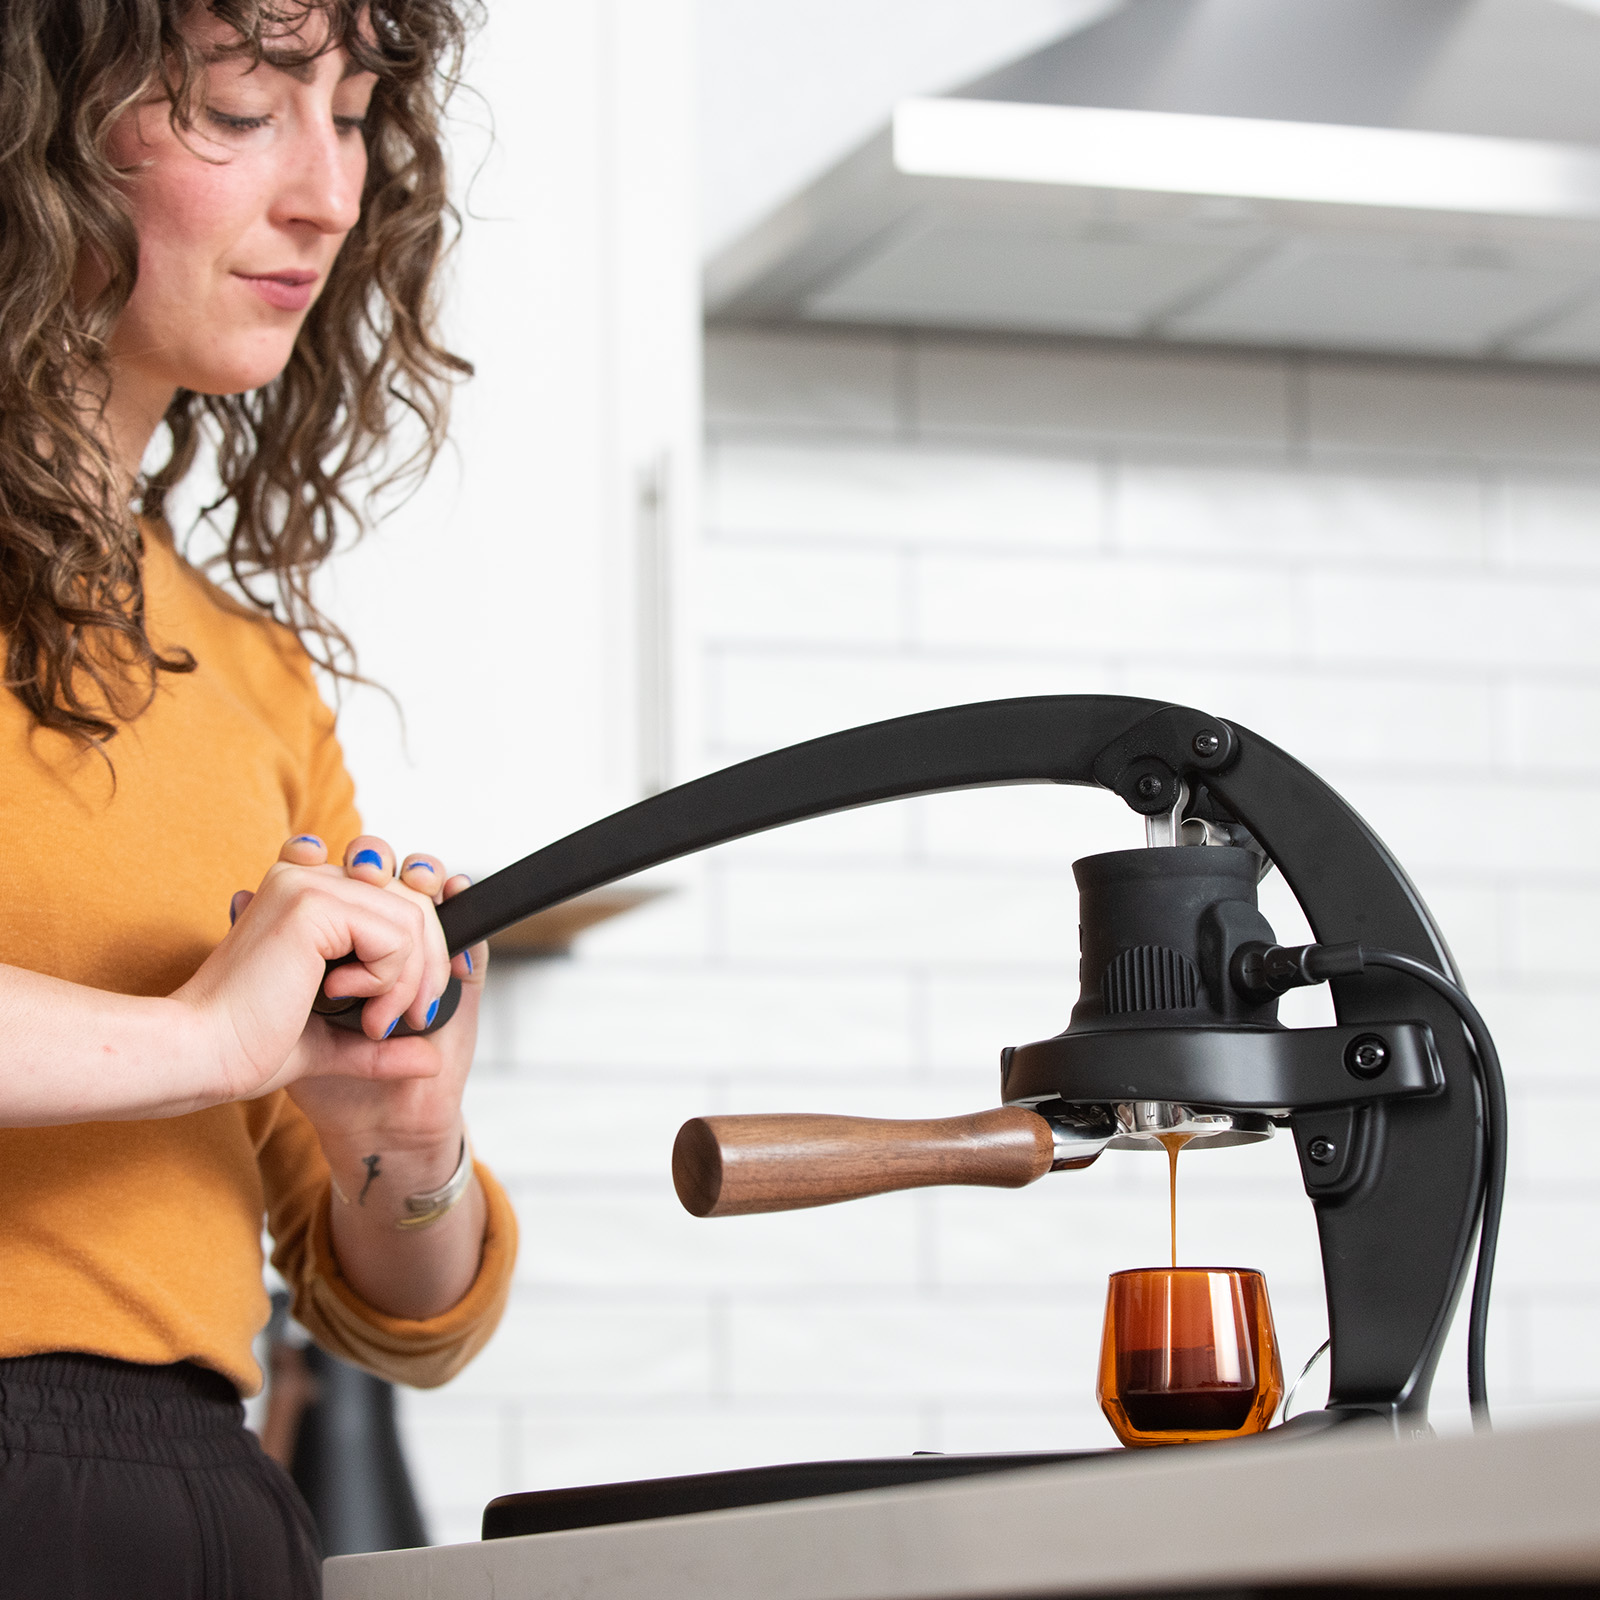 Overview of the Flair 58 manual espresso press that pulls shots